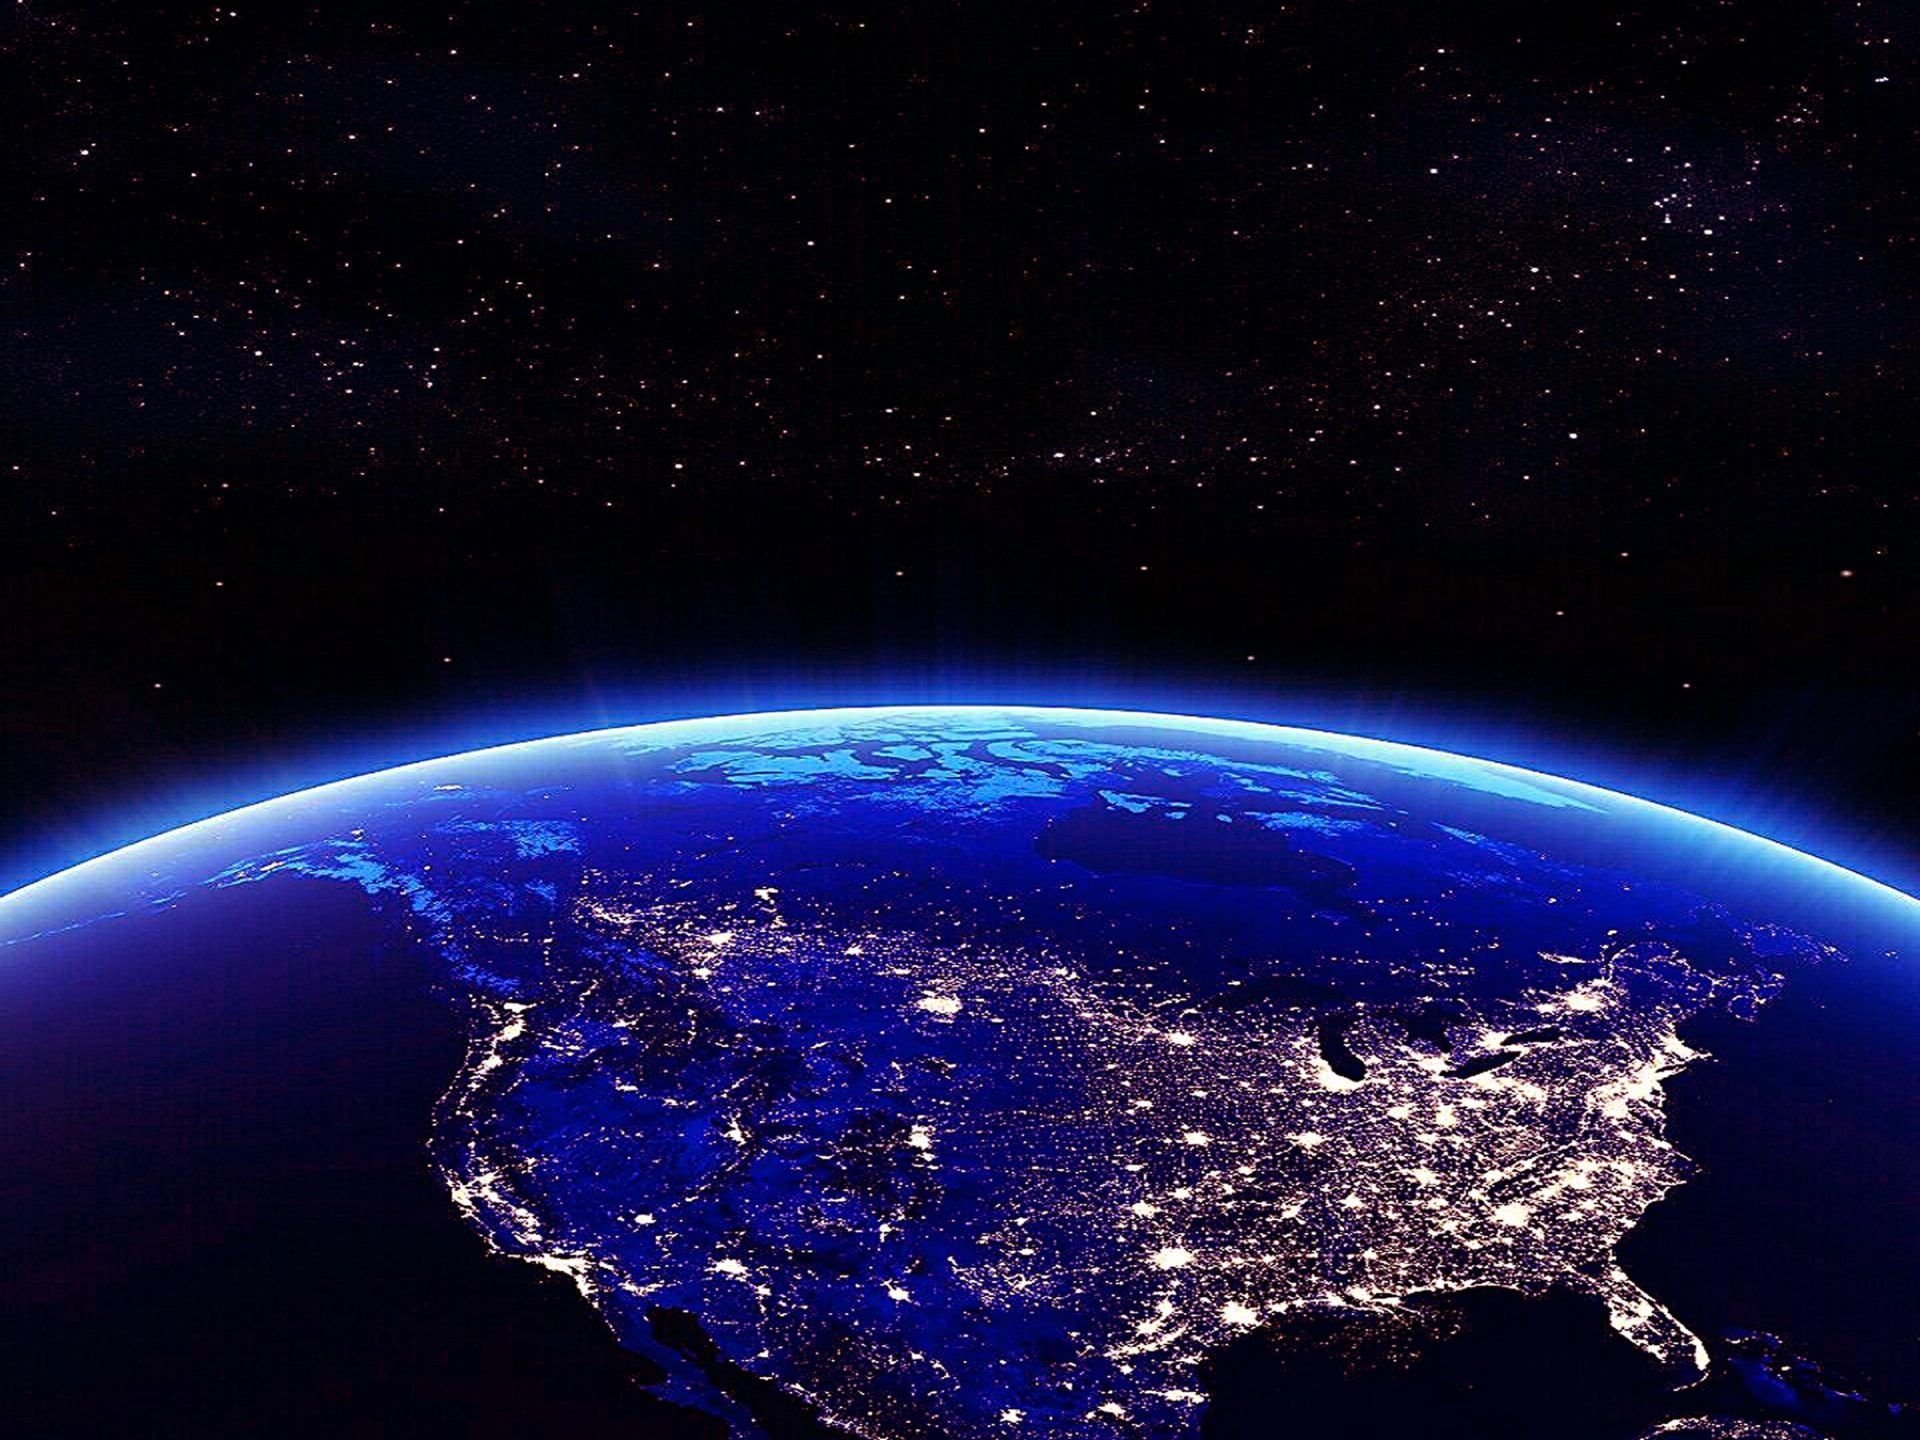 Earth North America In The Night View From Space 4k Wallpaper For Mobile Phones Tablet And Lapx2160, Wallpaper13.com